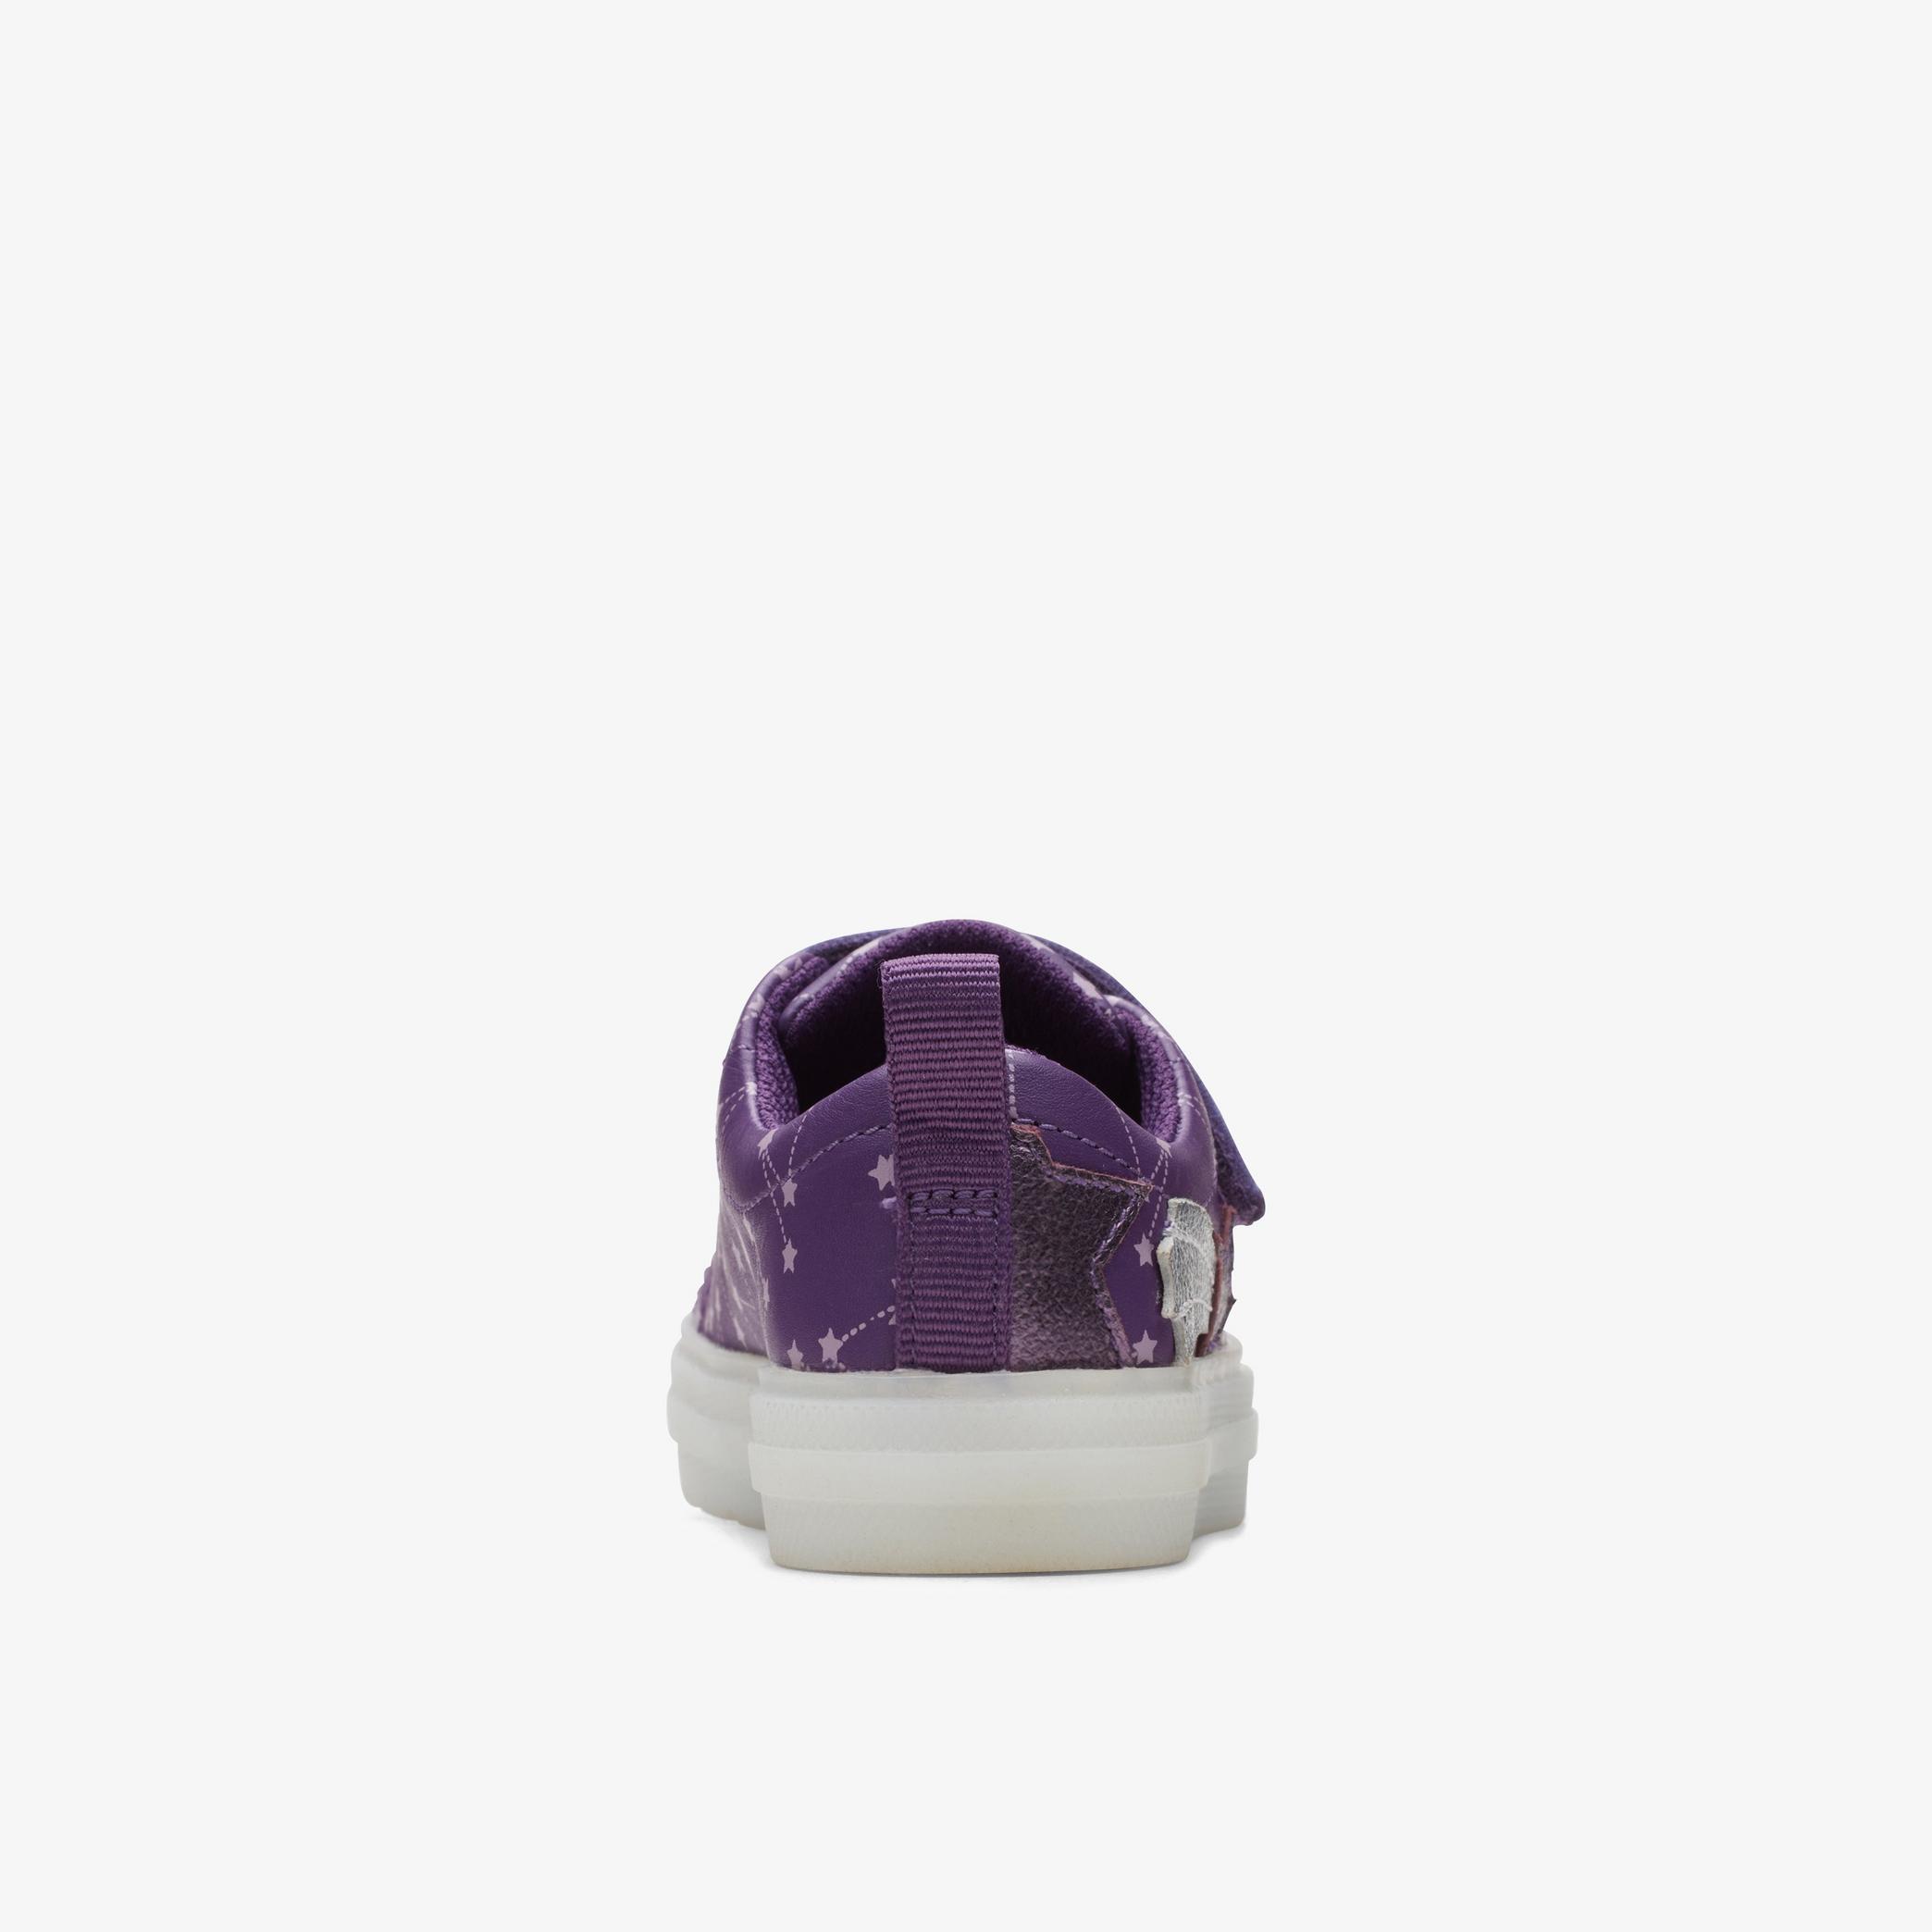 Flare Fly Toddler Purple Shoes, view 5 of 6